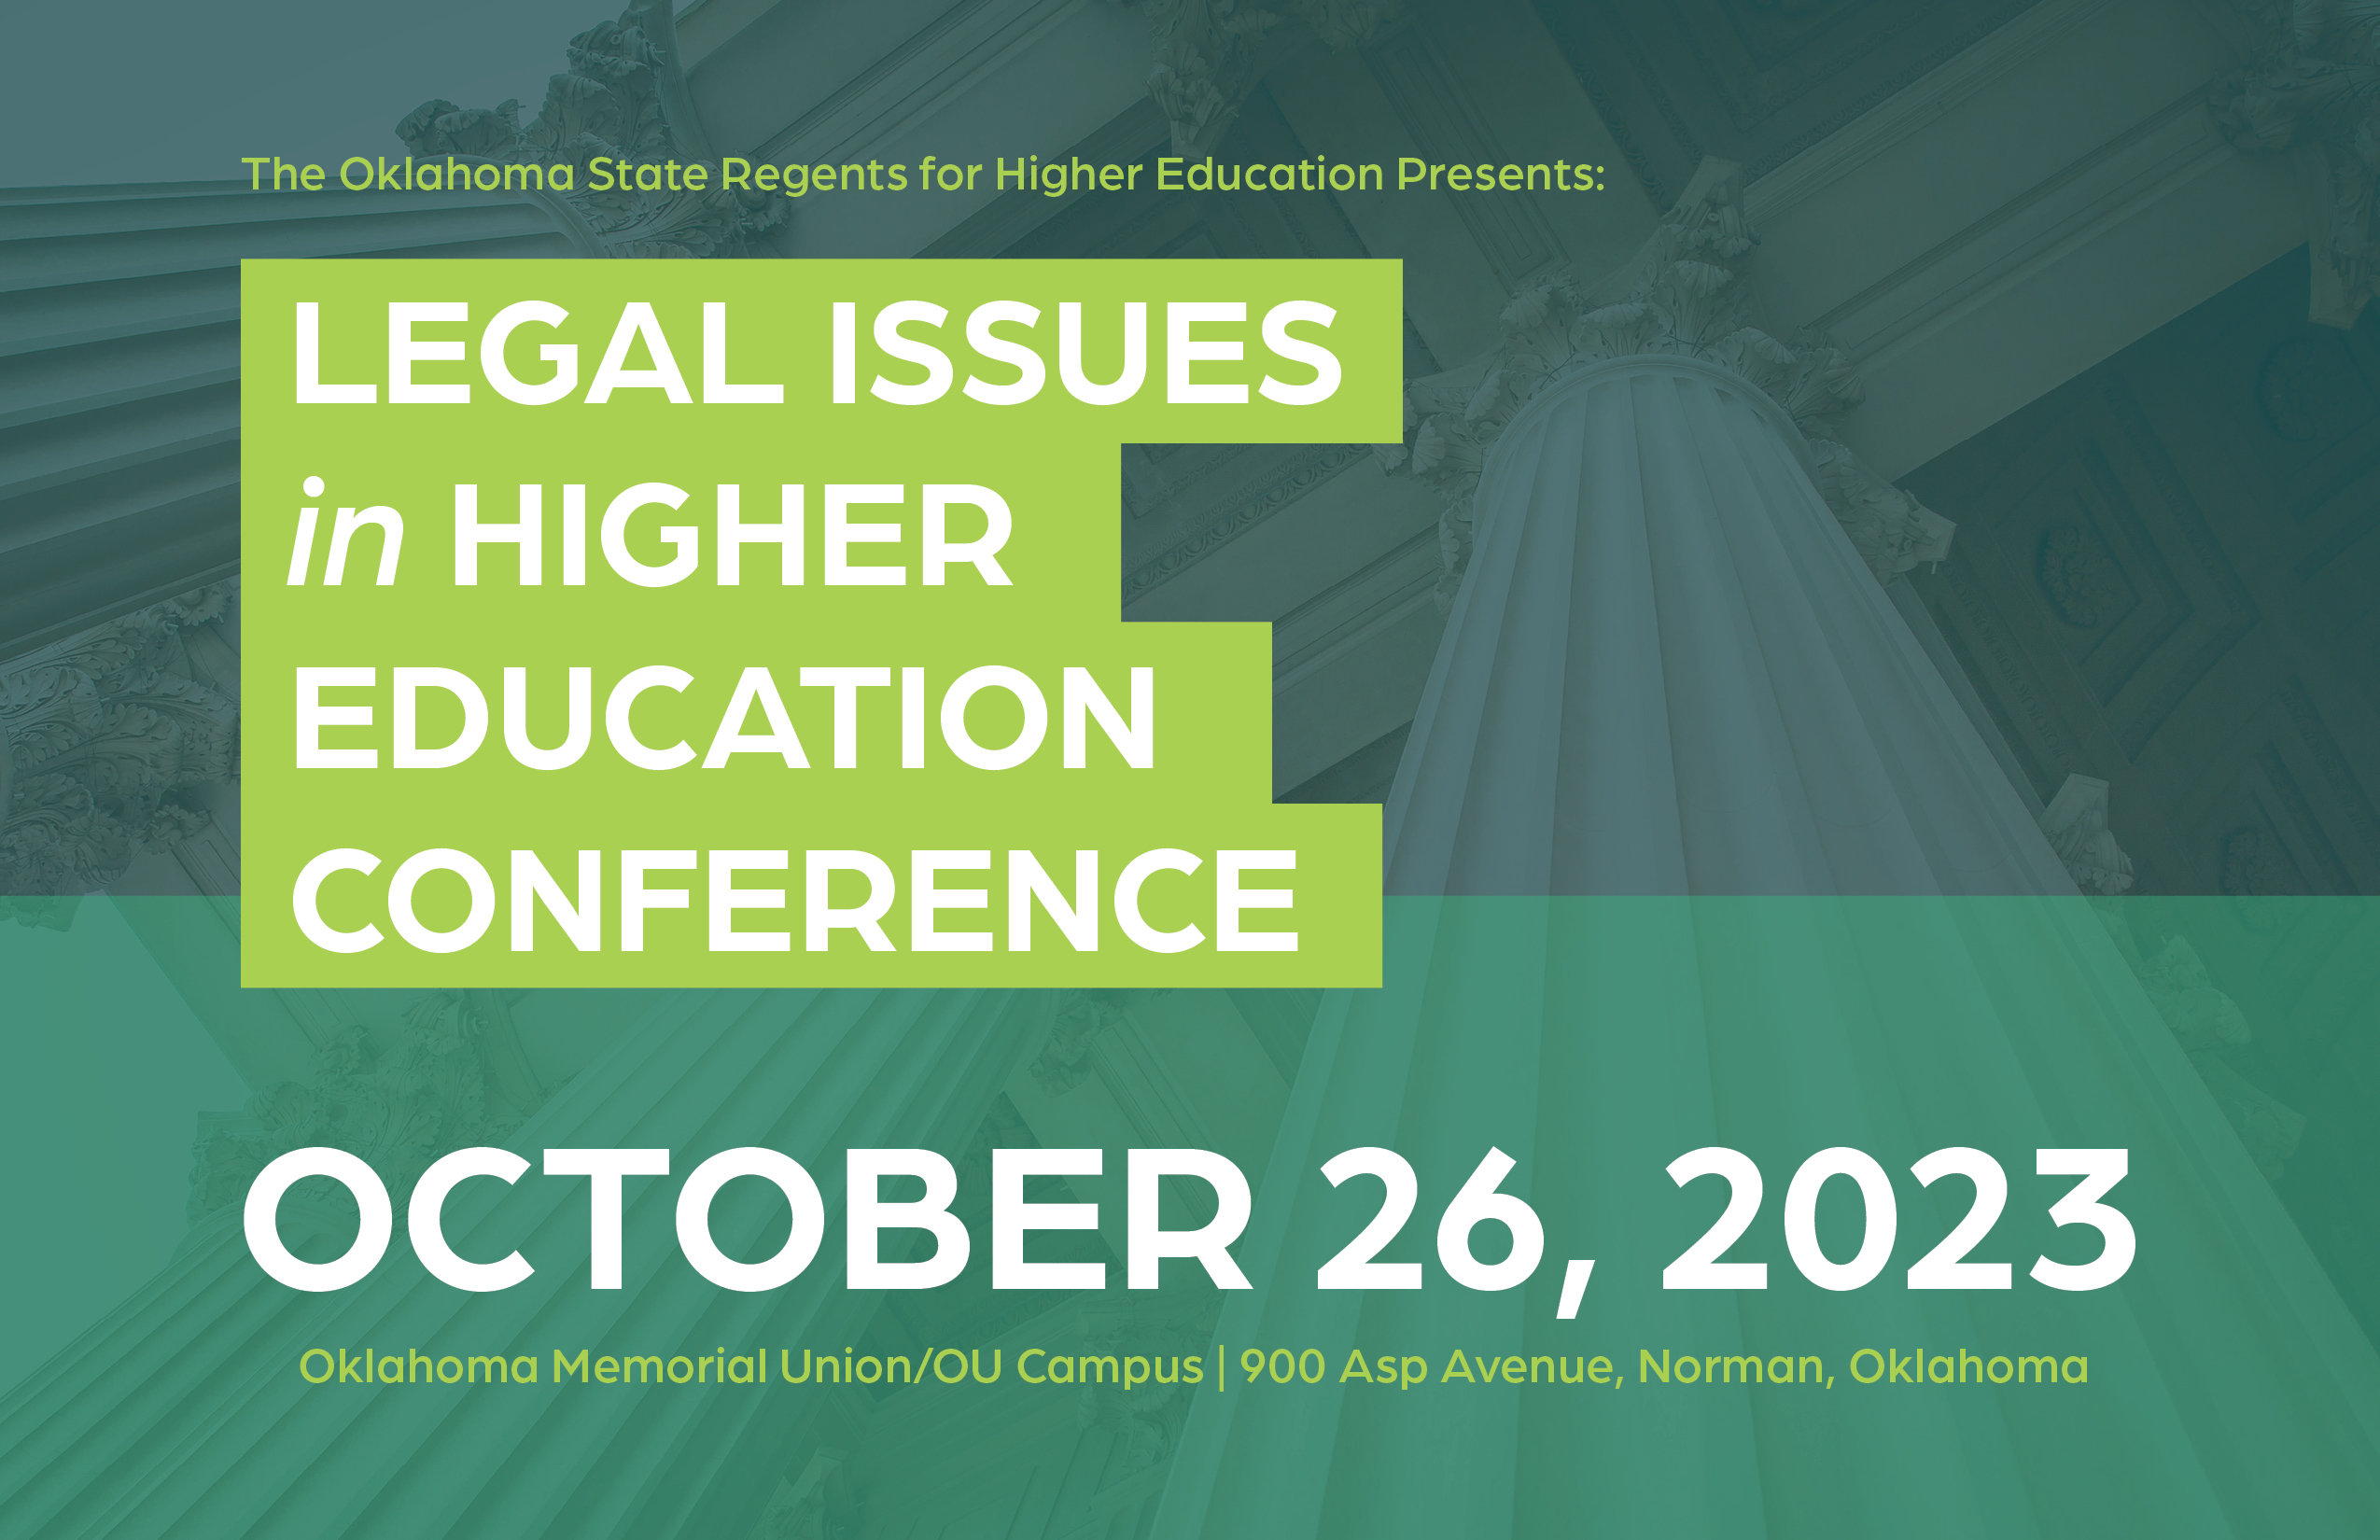 The Oklahoma State Regents for Higher Education Present Legal Issues in Higher Education Conference October 26, 2023 Oklahoma Memorial Union/OU Campus | 900 Asp Avenue, Norman, Oklahoma 